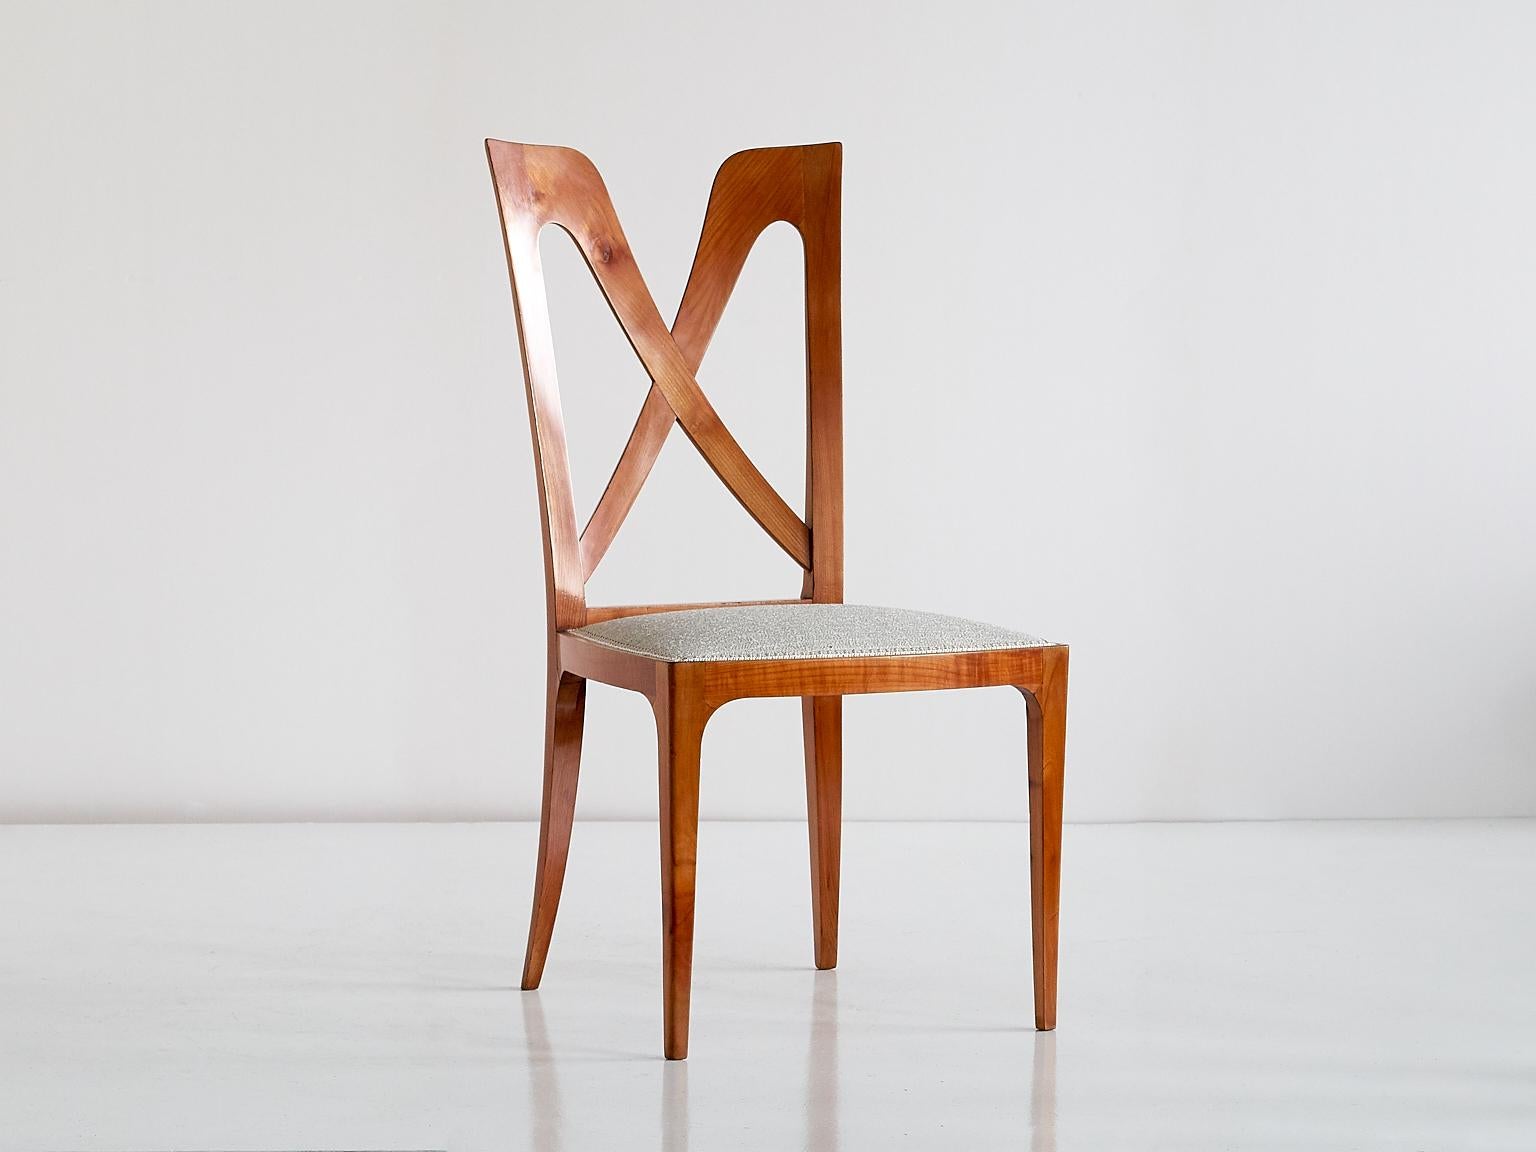 Fabric Set of Six Ulderico Carlo Forni Dining Chairs in Cherry Wood, Italy, 1940s For Sale